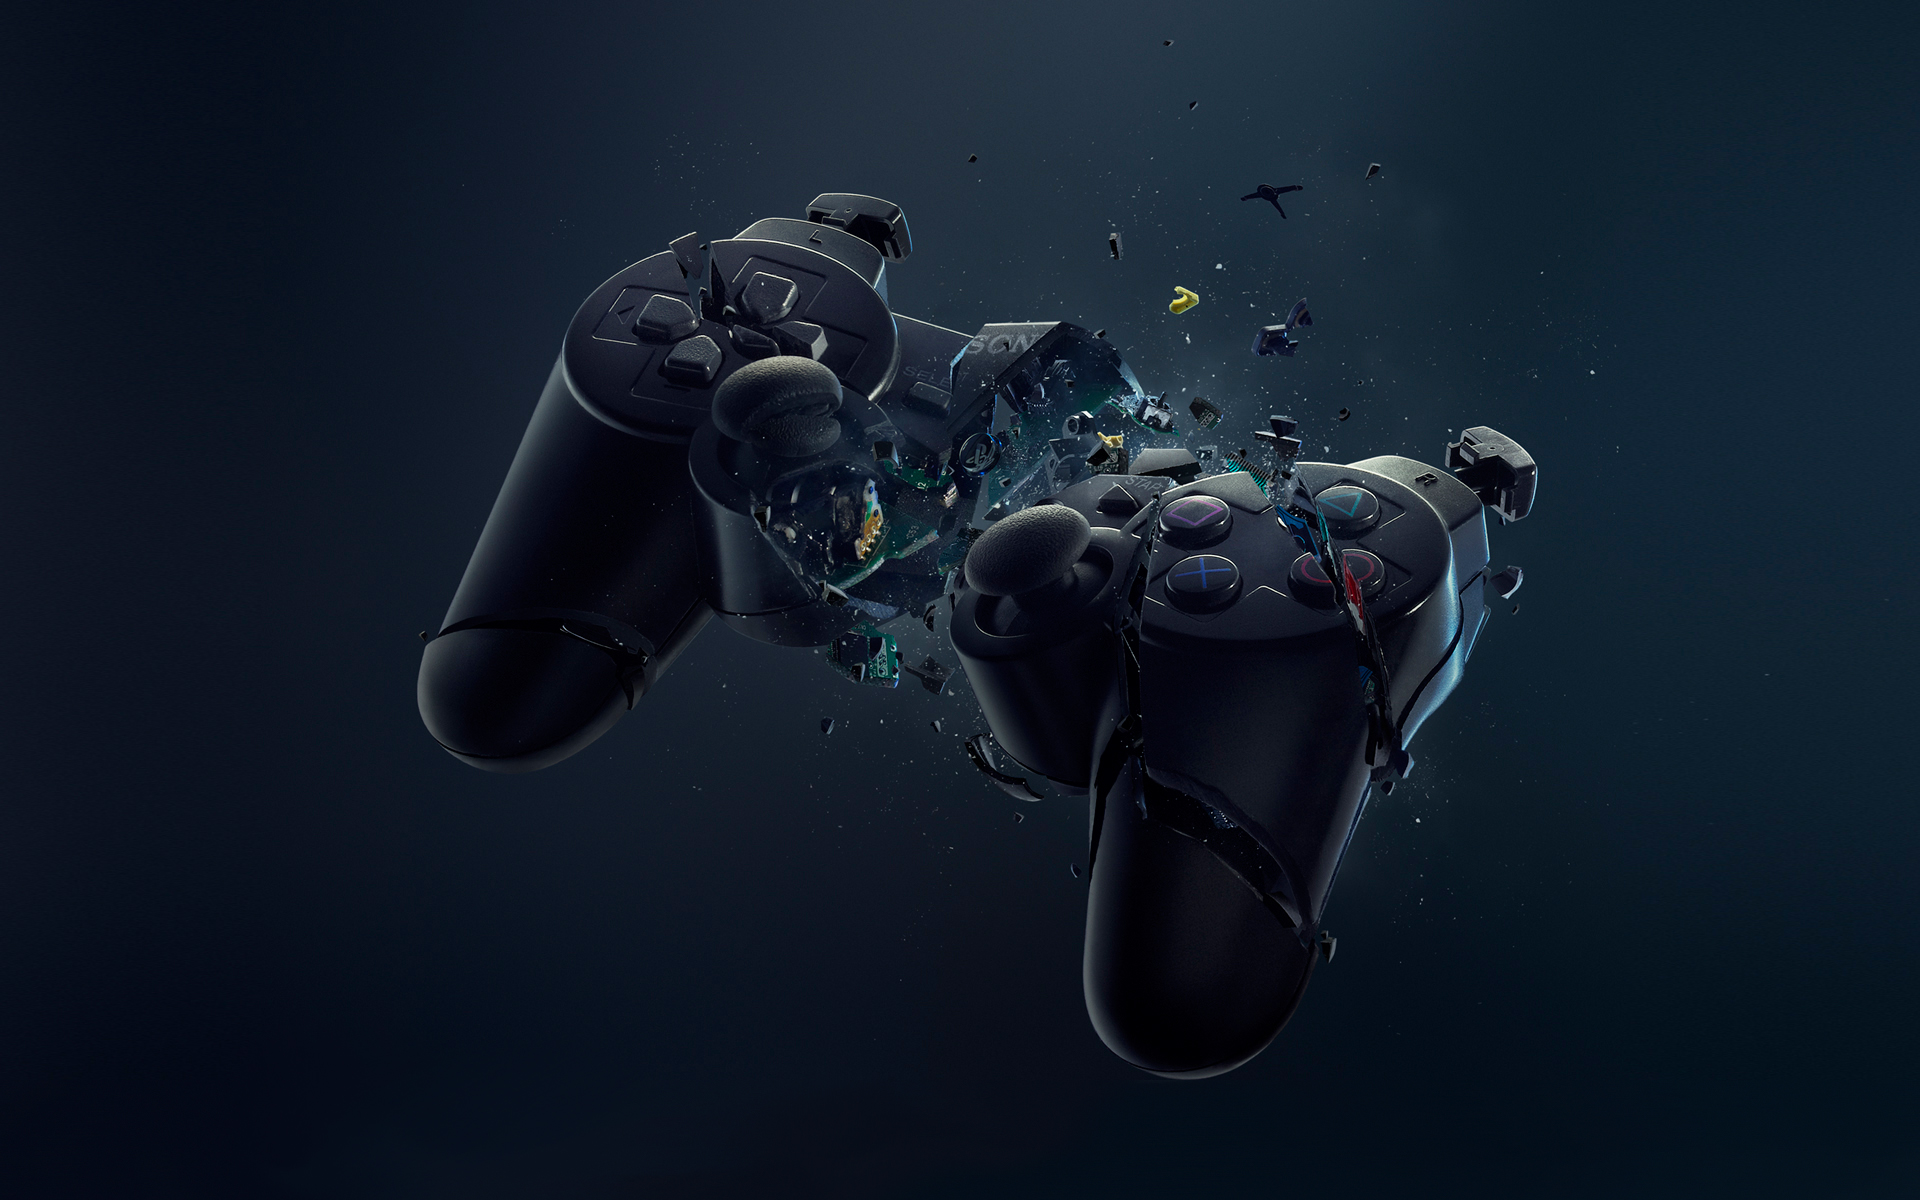  PS3 Pad Explosion Google Backgrounds PS3 Pad Explosion Google Themes